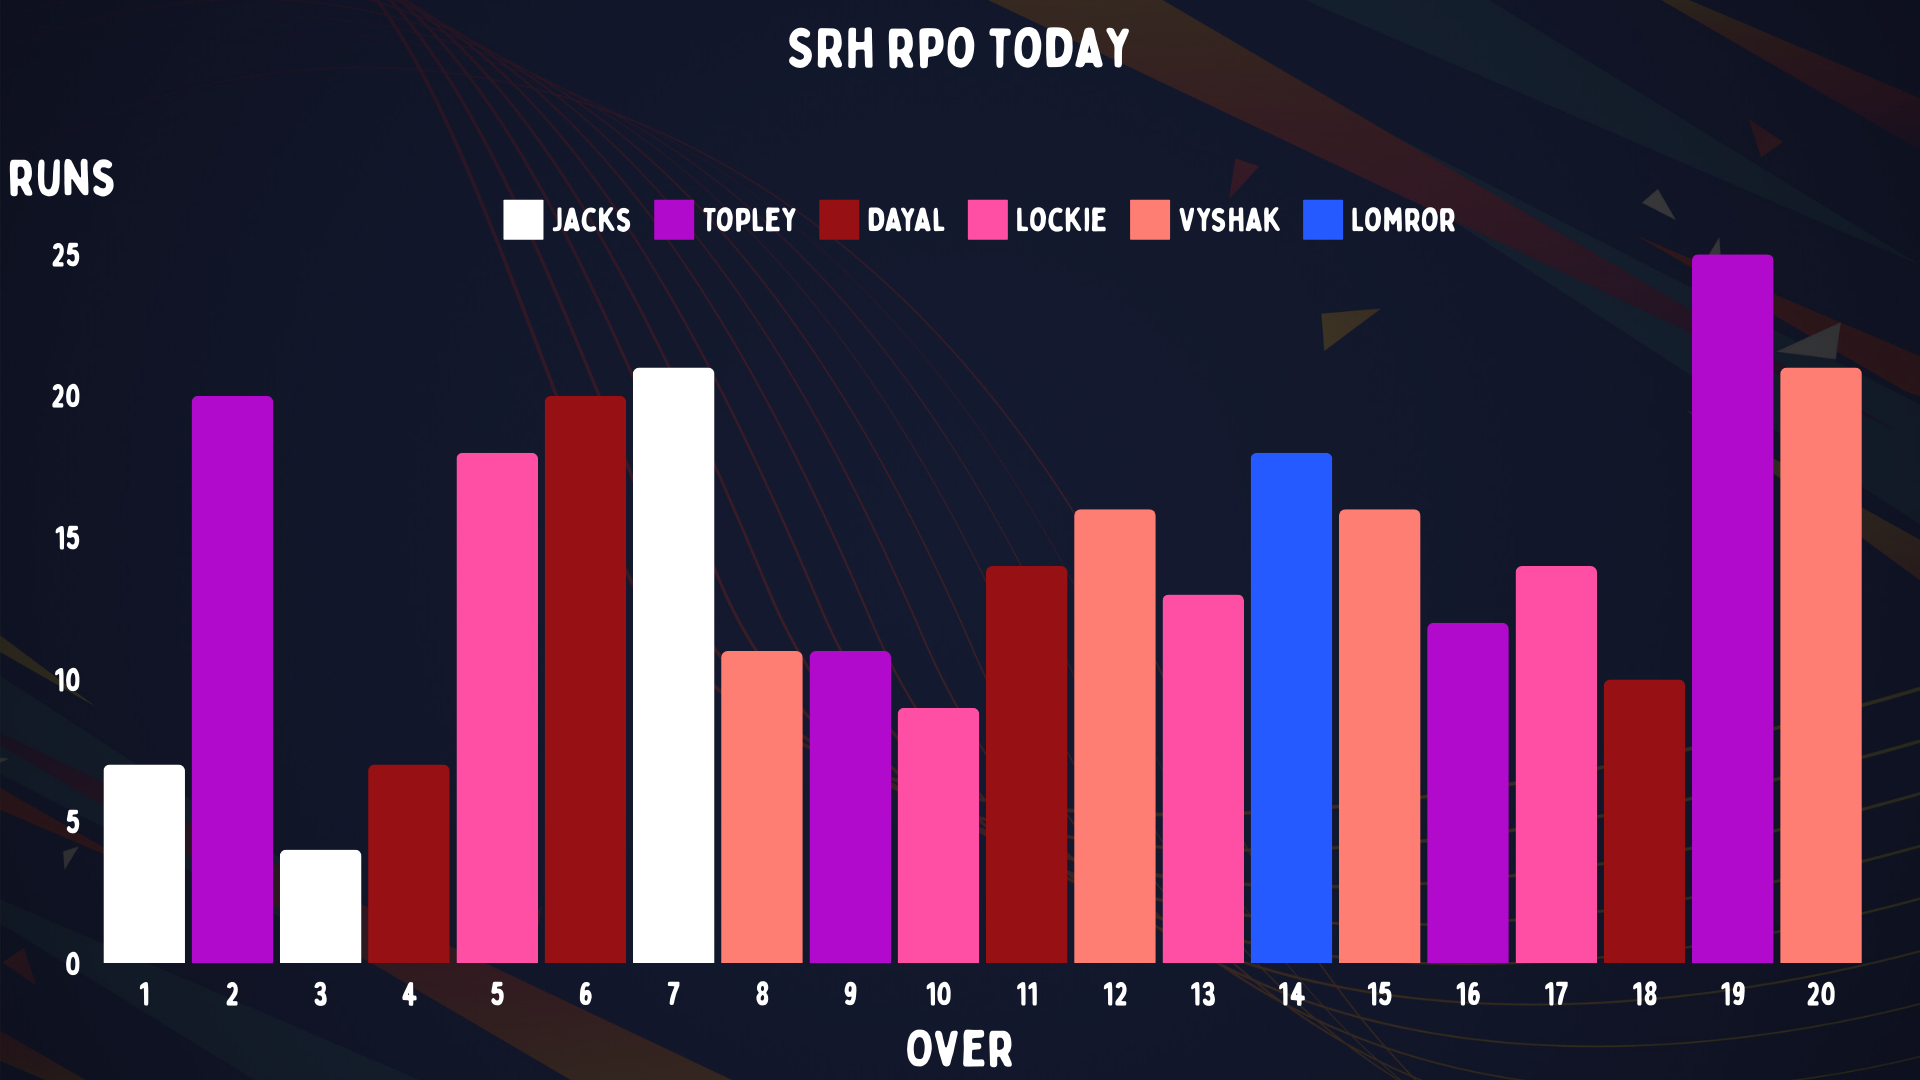 How to (almost) make 300 in the IPL